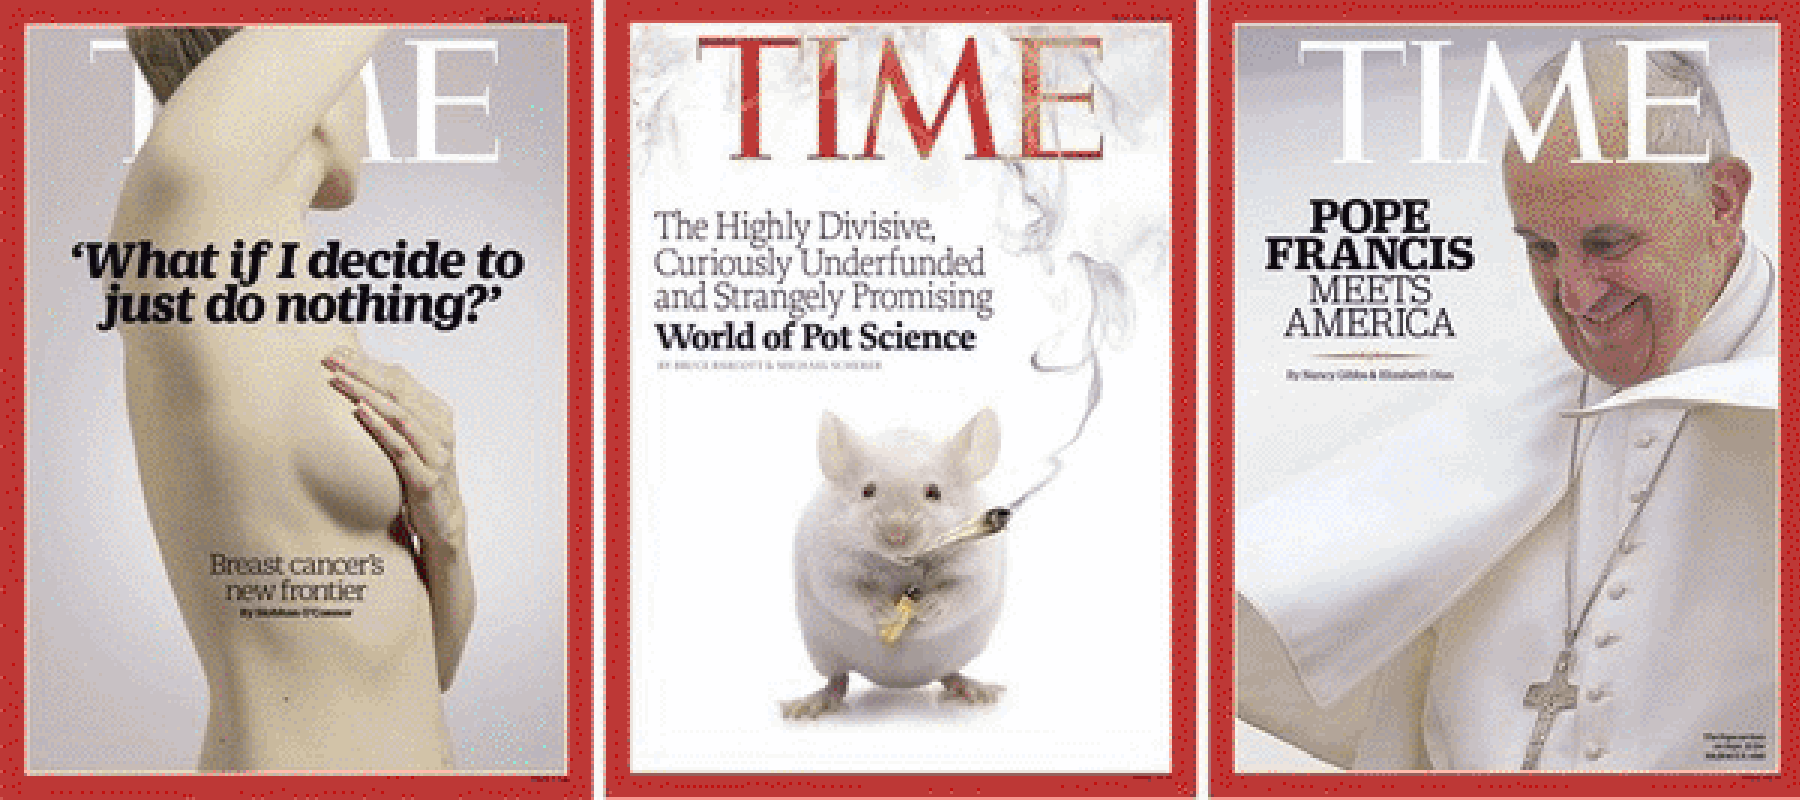 TIME Magazine Article on the Fecal Immunochemical Test